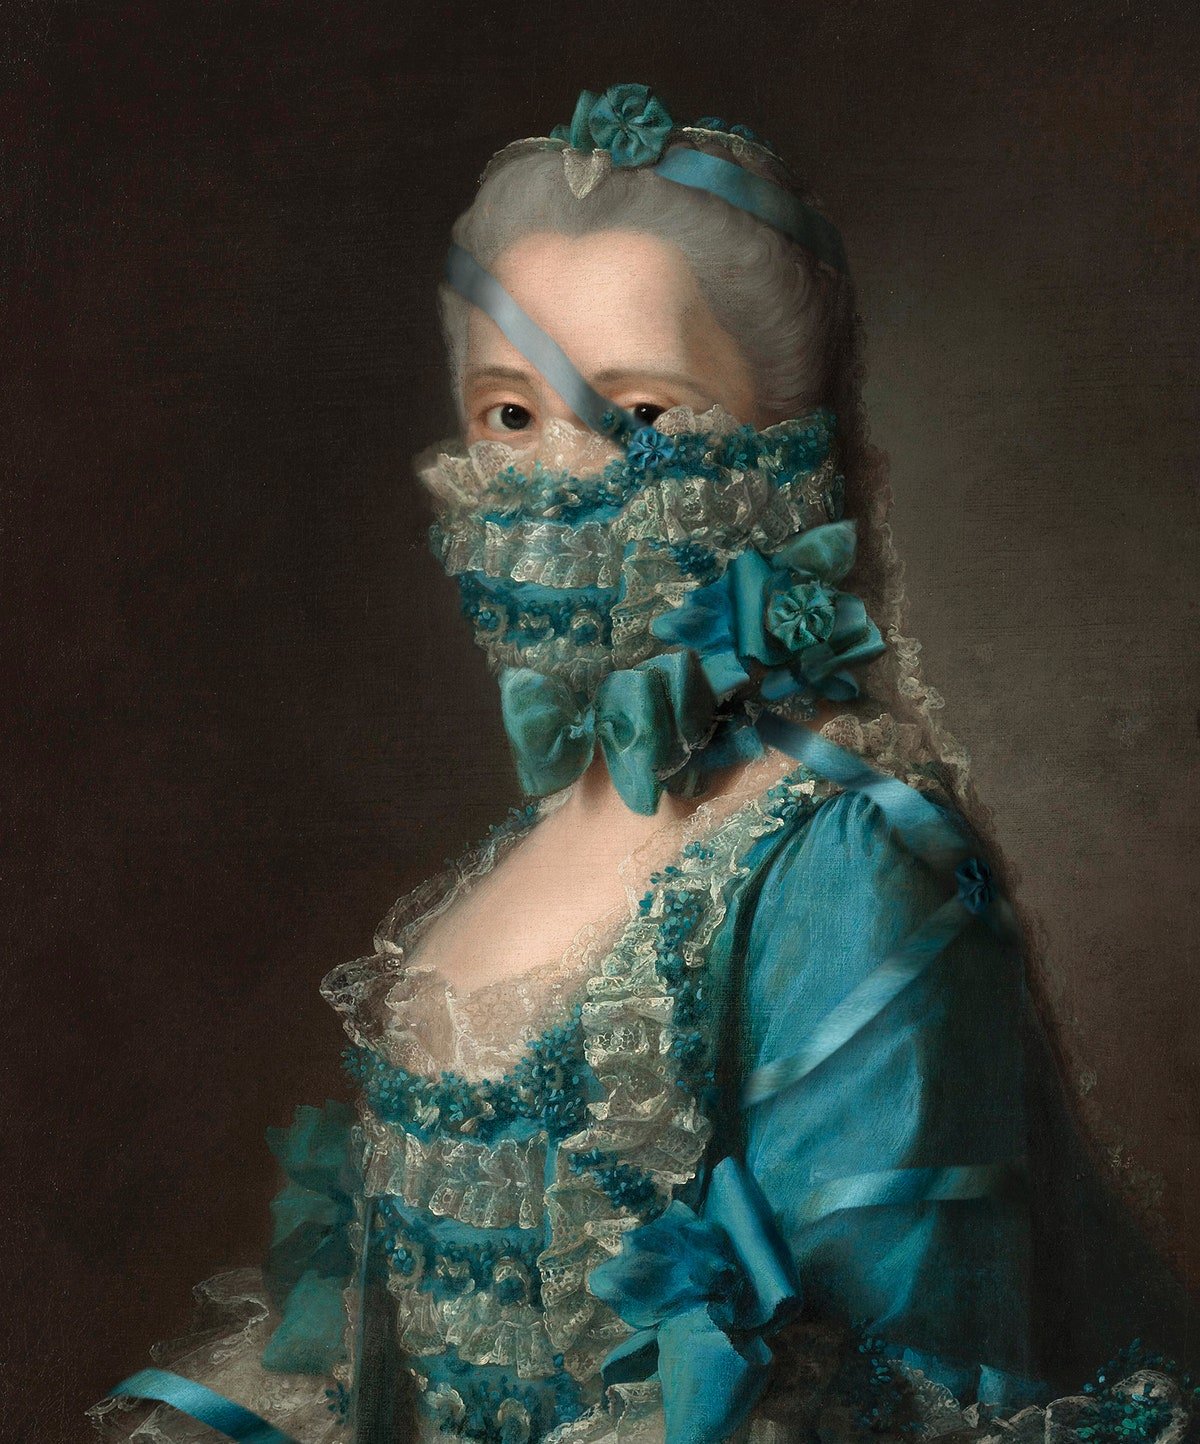 These Masked Portraits Are an Instagram Sensation